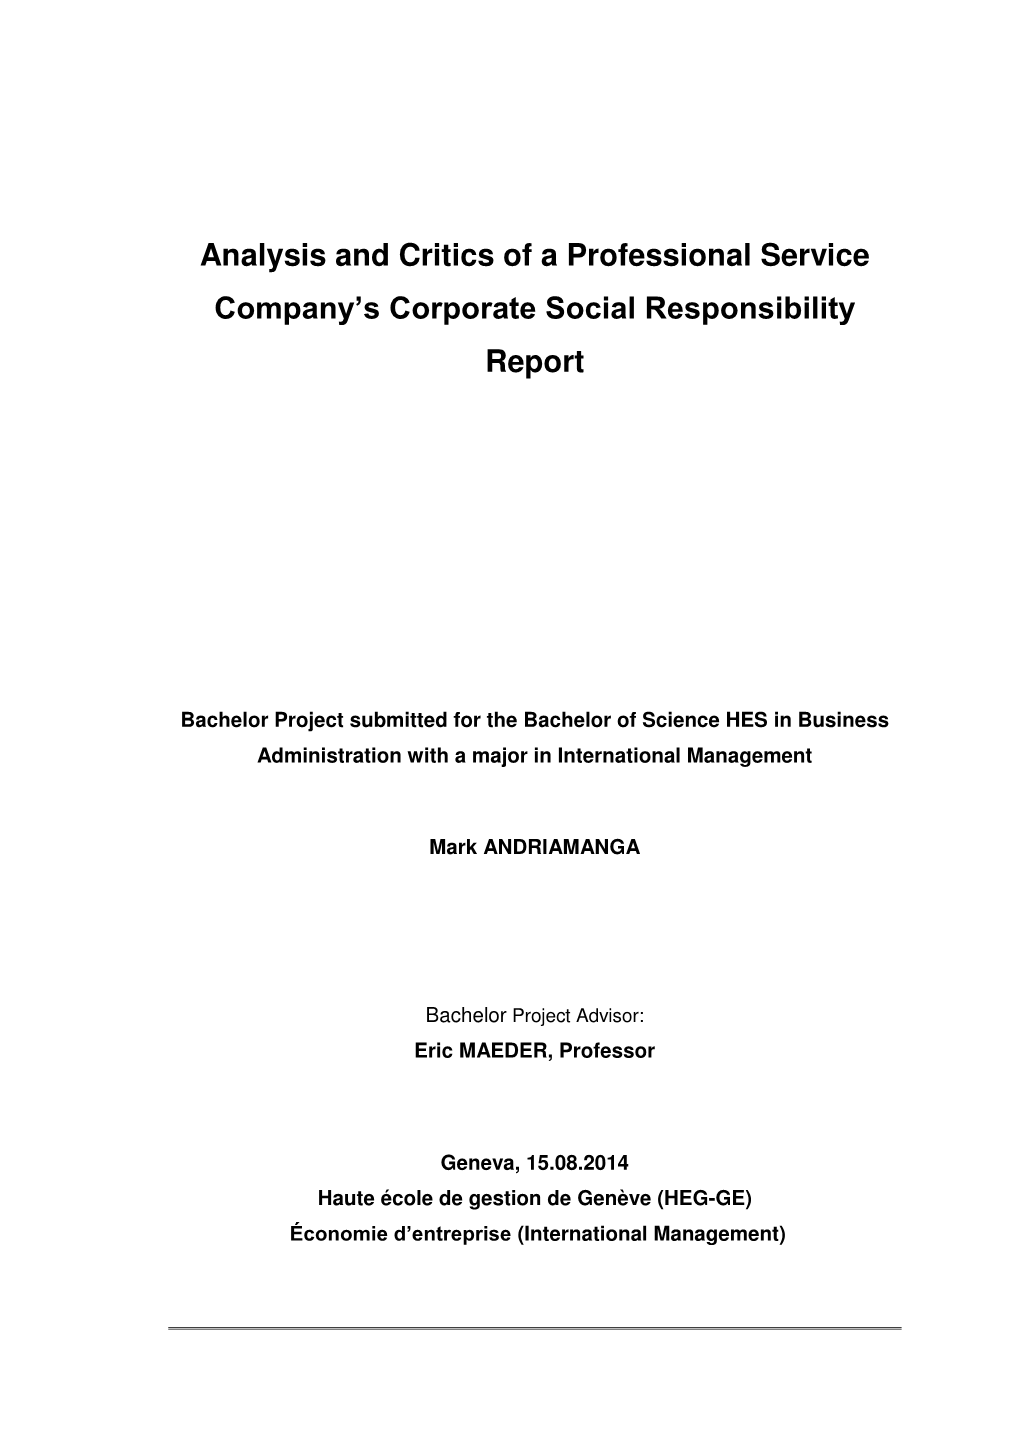 Analysis and Critics of a Professional Service Company's Corporate